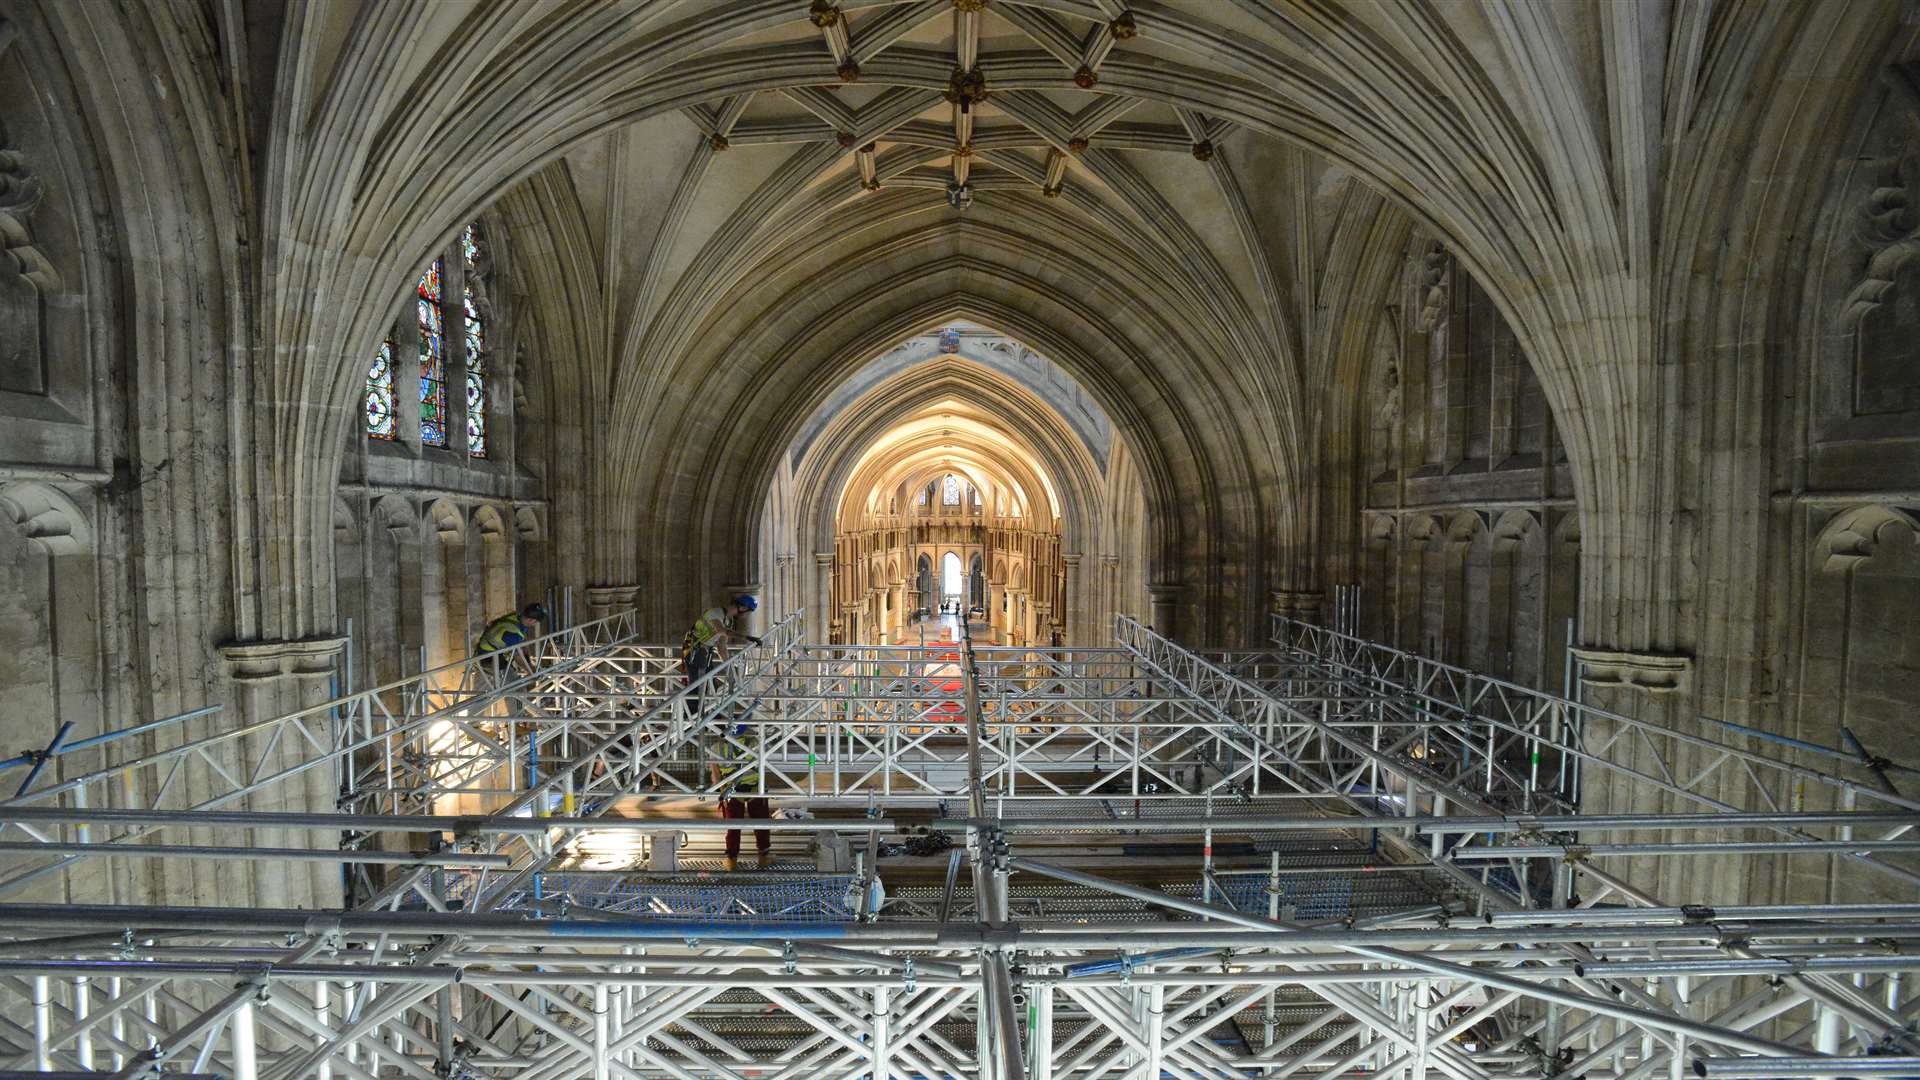 Scaffolders at work on the safety deck above the 15th century Cathedral Nave.